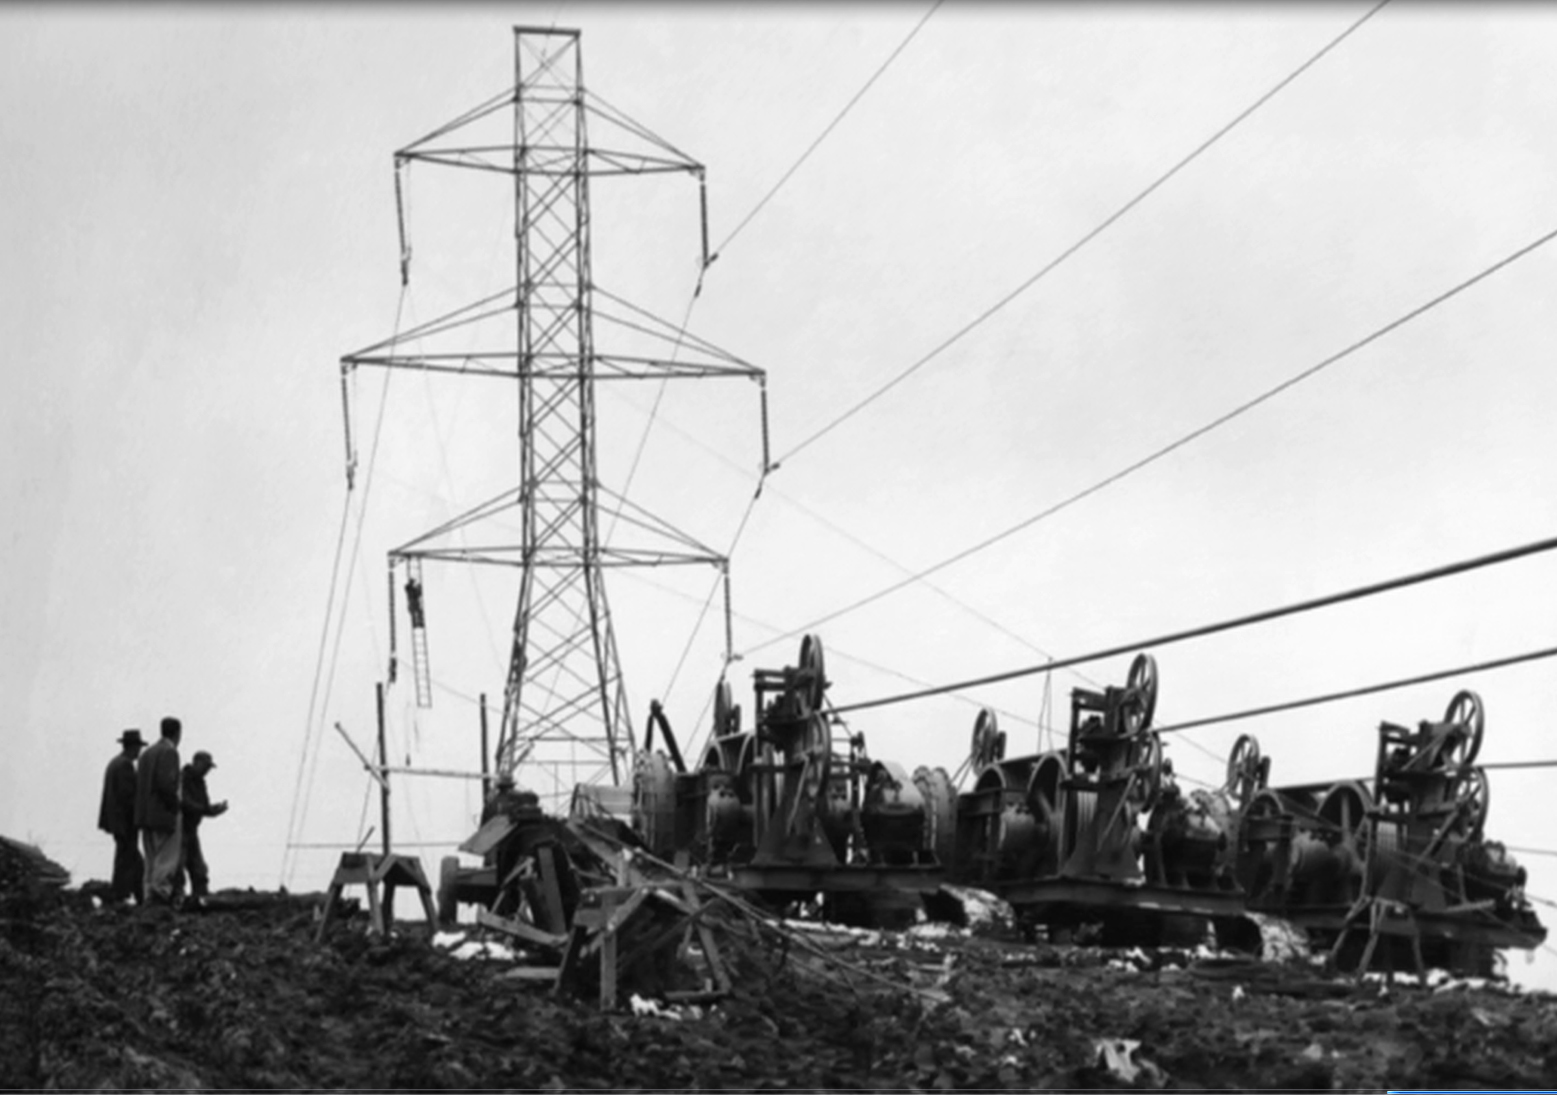 Group of workers assembling the wires of a transmission tower